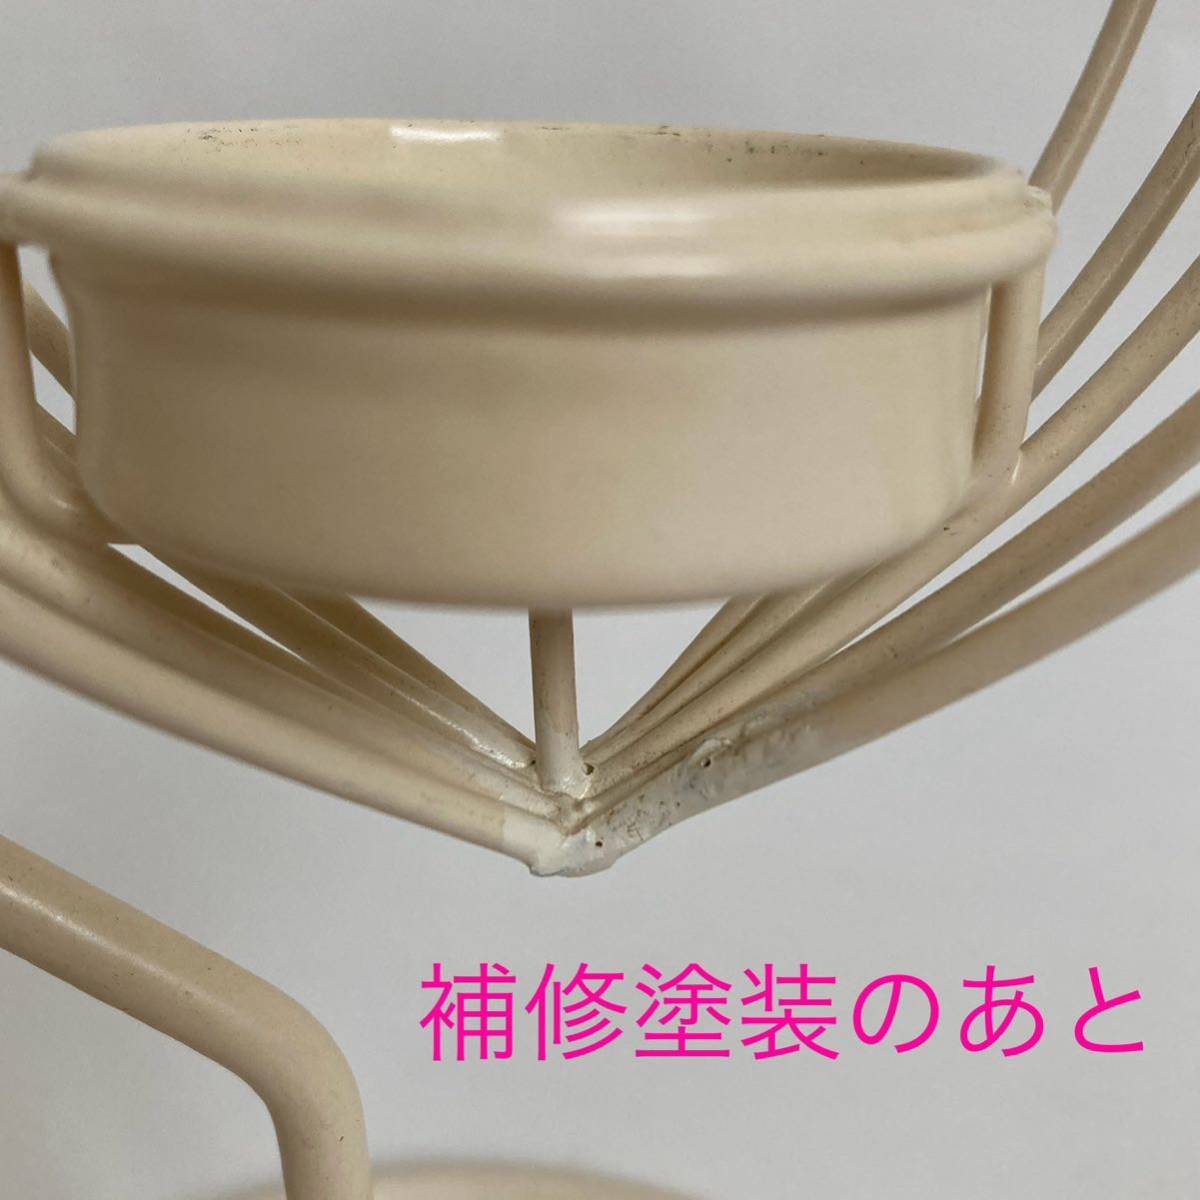  iron Heart type candle holder candle stand repair after equipped cream color height 22.5cm swing candle holder interior 